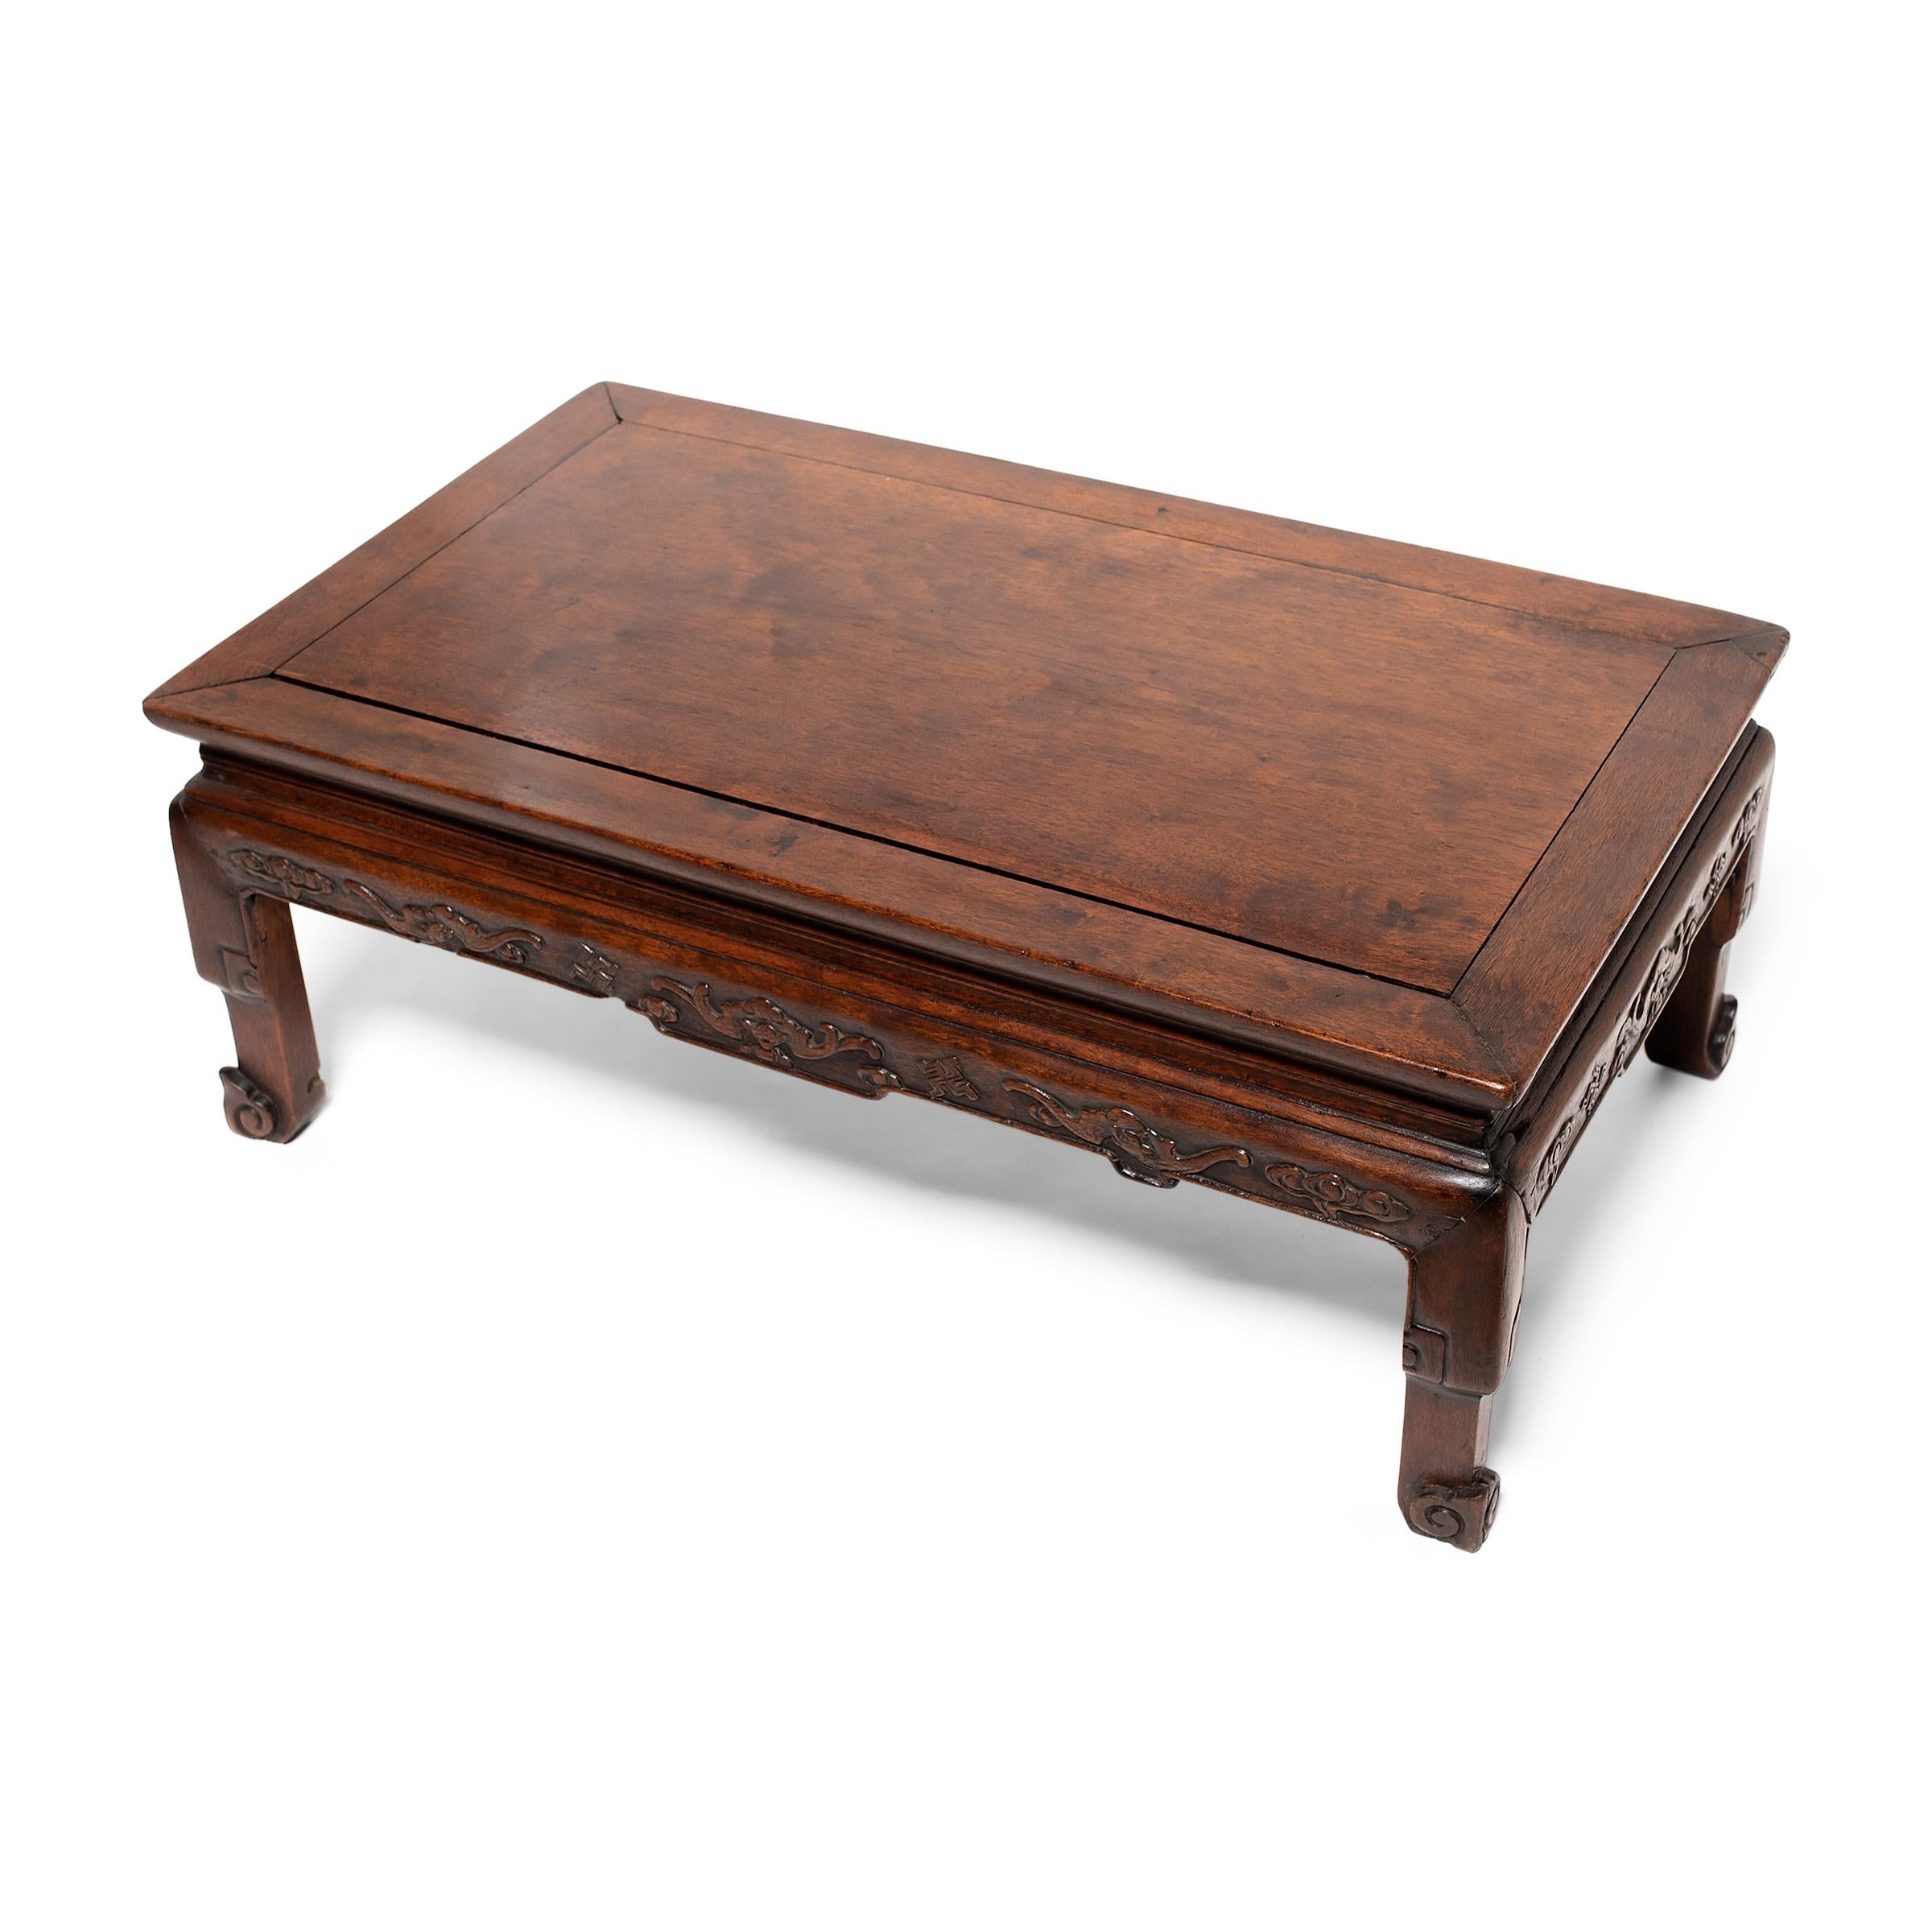 Carved Chinese Low Kang Table, C. 1850 For Sale